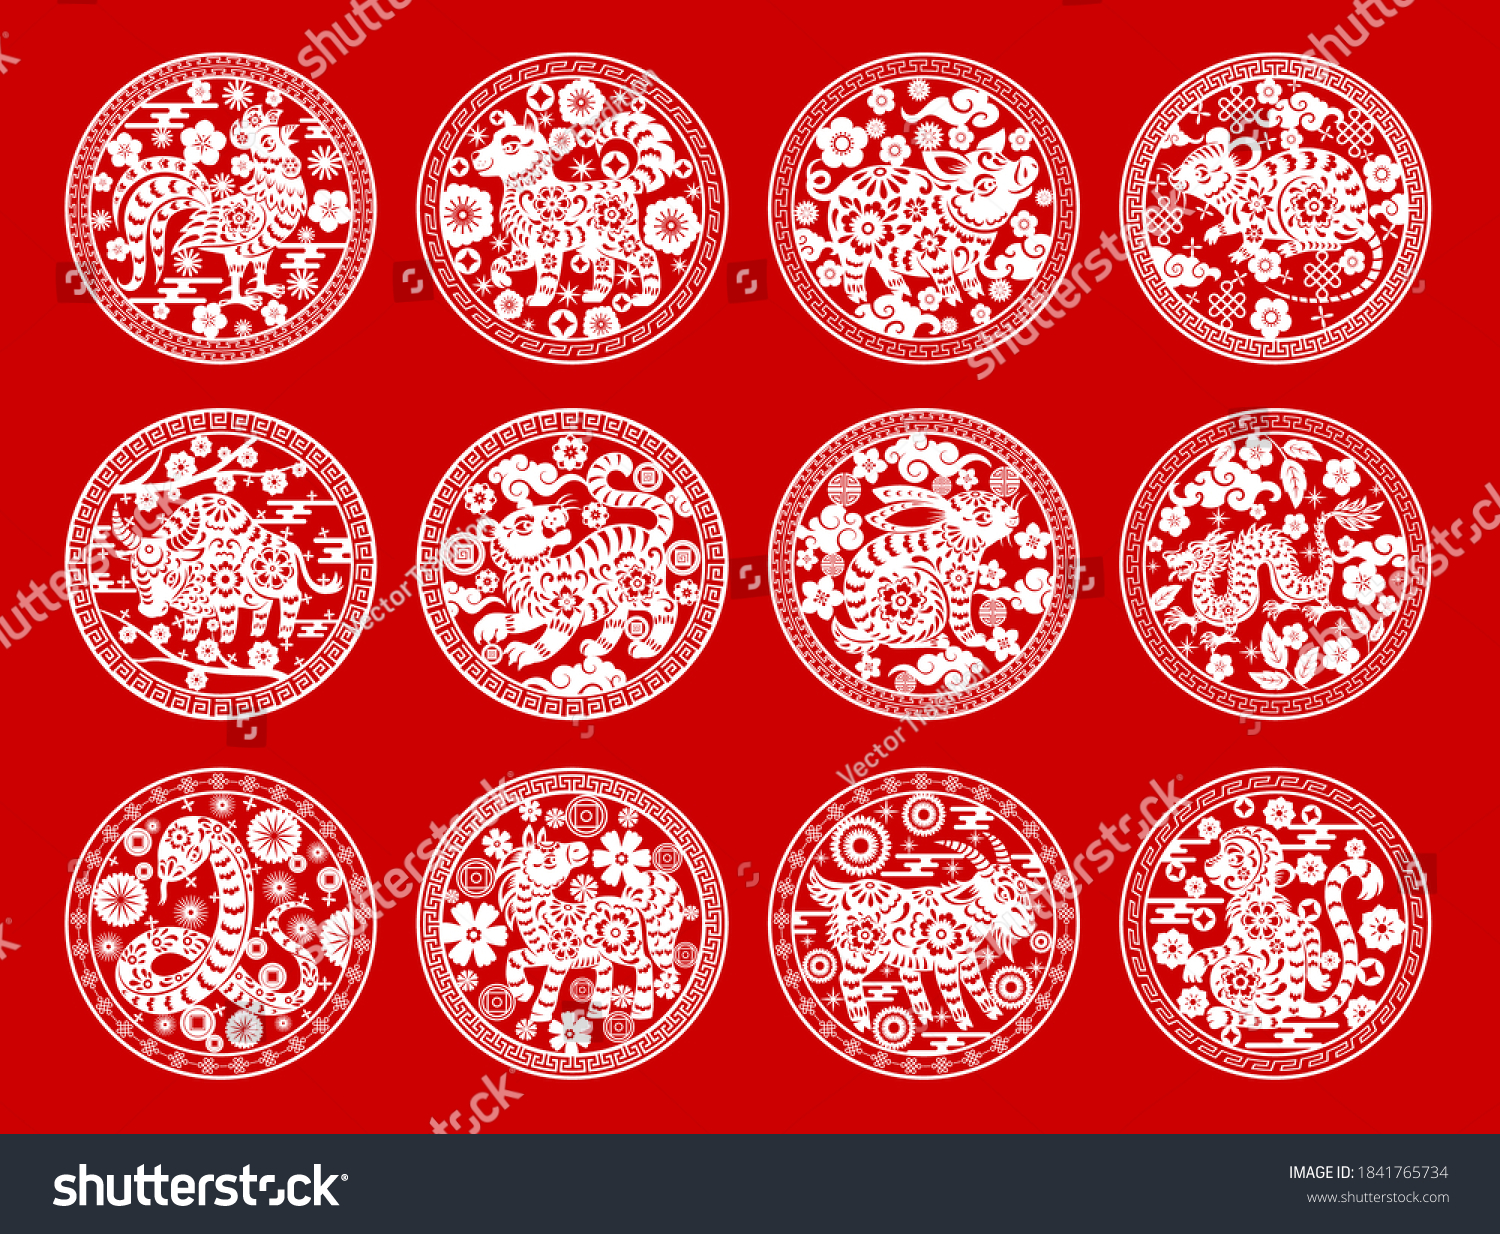 SVG of Chinese zodiac animals isolated vector icons set. White horoscope signs cock, dog and pig, rat, bull and tiger. Hare, dragon and snake, horse, goat and ape on red background. Asian symbols of year svg